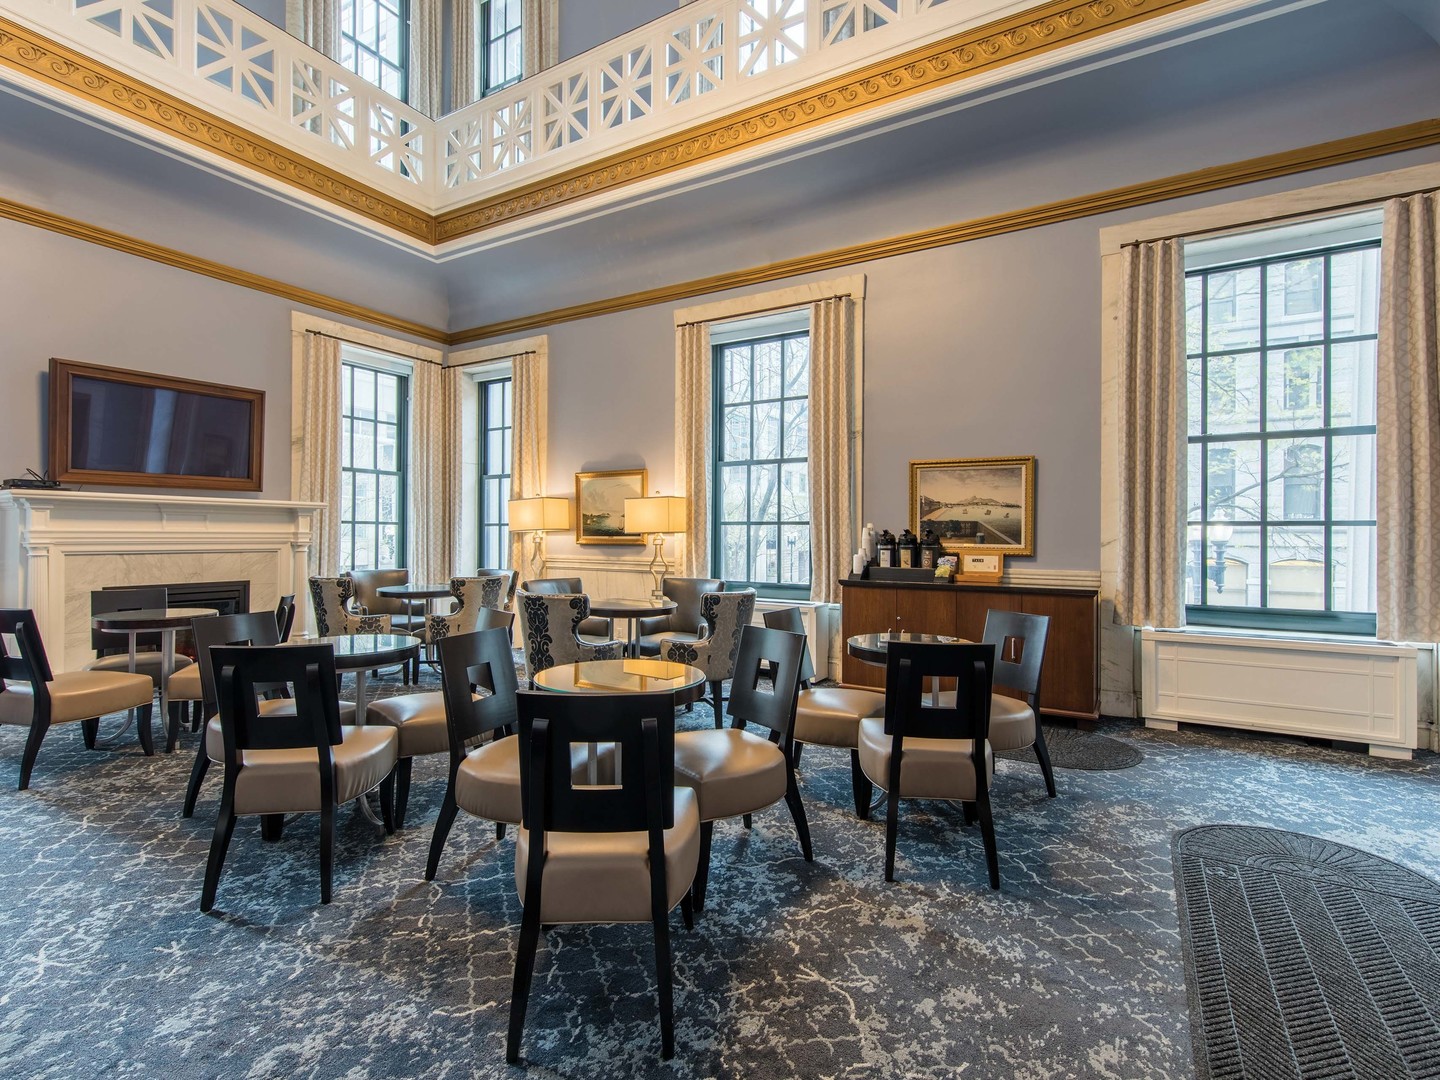 Marriott Vacation Club Pulse<span class='trademark'>®</span> at Custom House, Boston Owners Lounge. Marriott Vacation Club Pulse<span class='trademark'>®</span> at Custom House, Boston is located in Boston, Massachusetts United States.